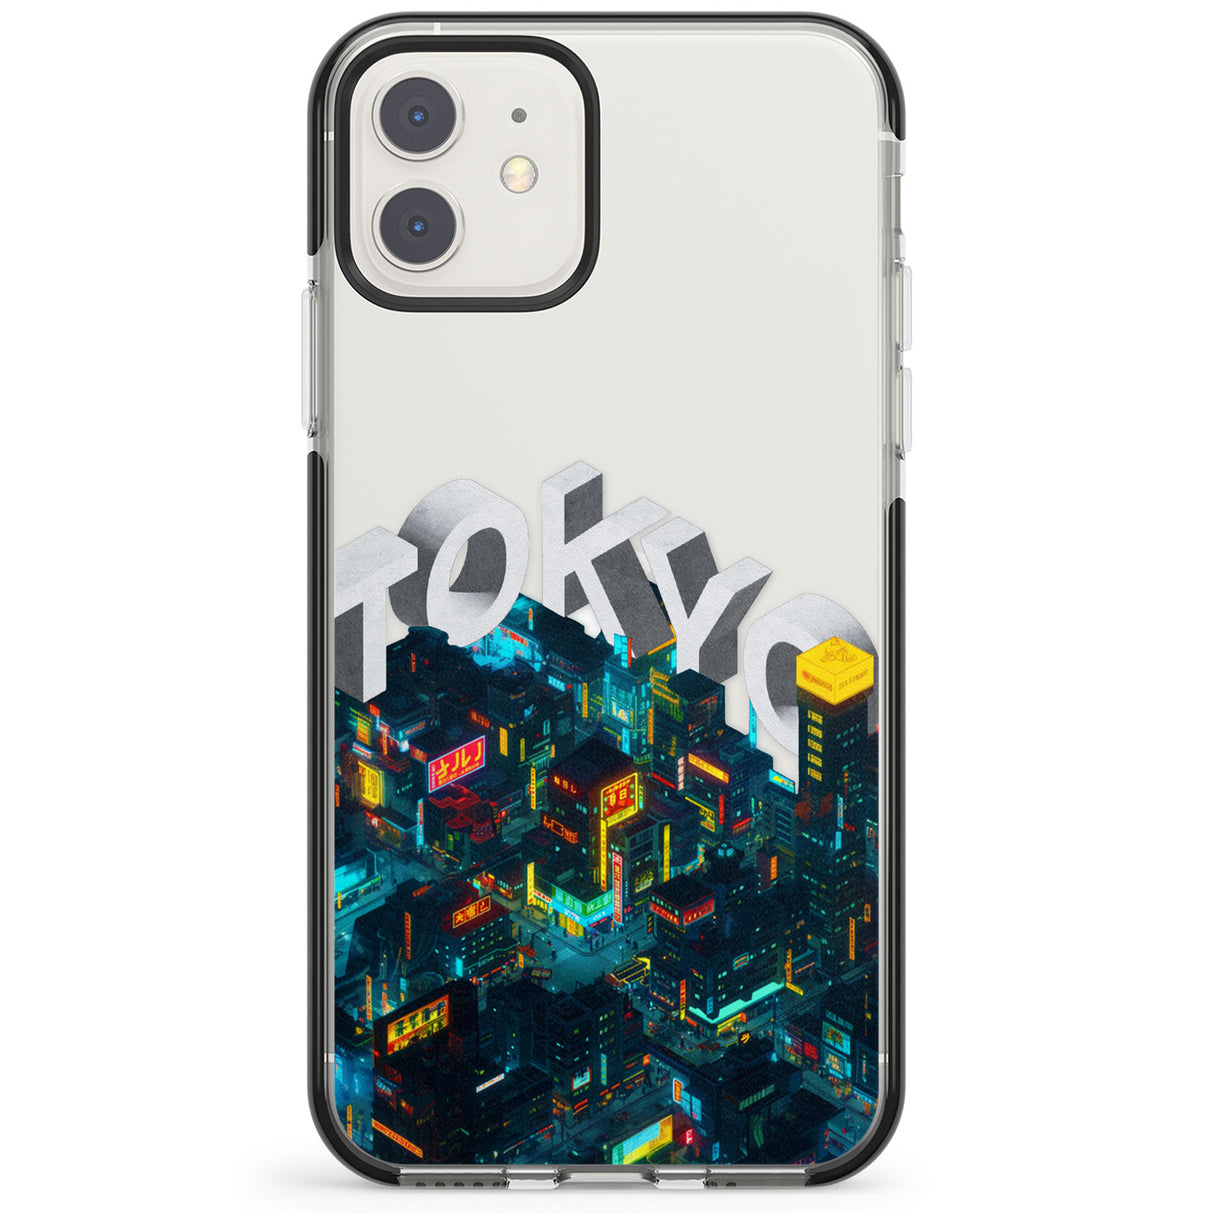 Tokyo Impact Phone Case for iPhone 11, iphone 12